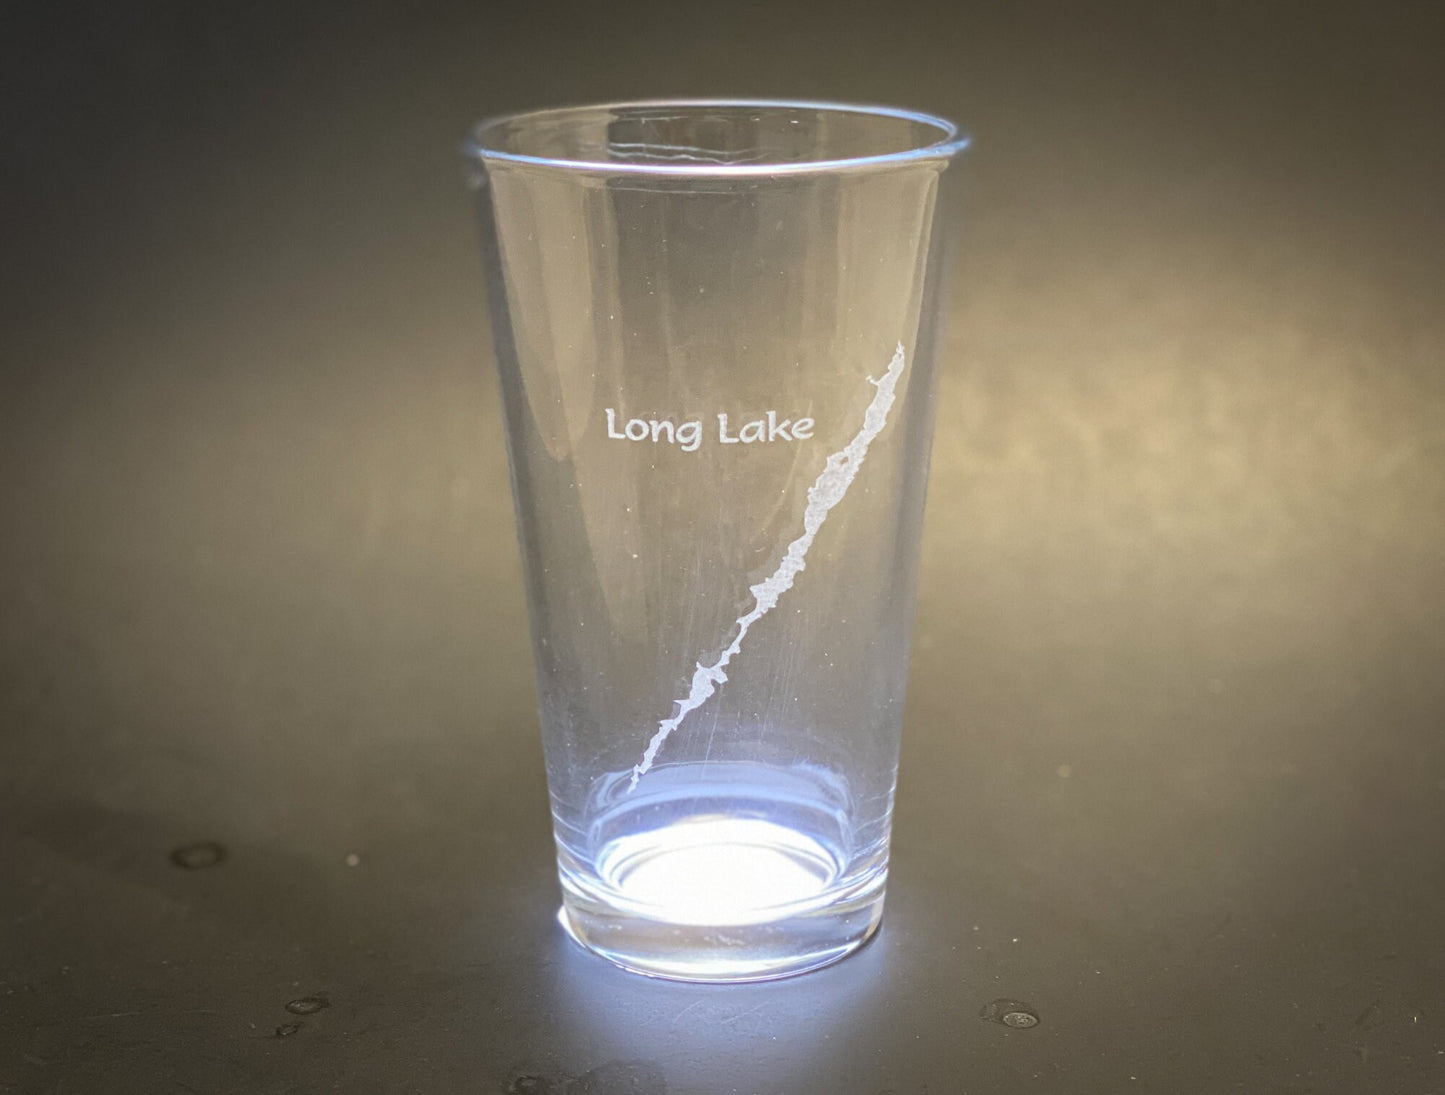 Long Lake New York Pint Glass - Laser Etched Pint Glass